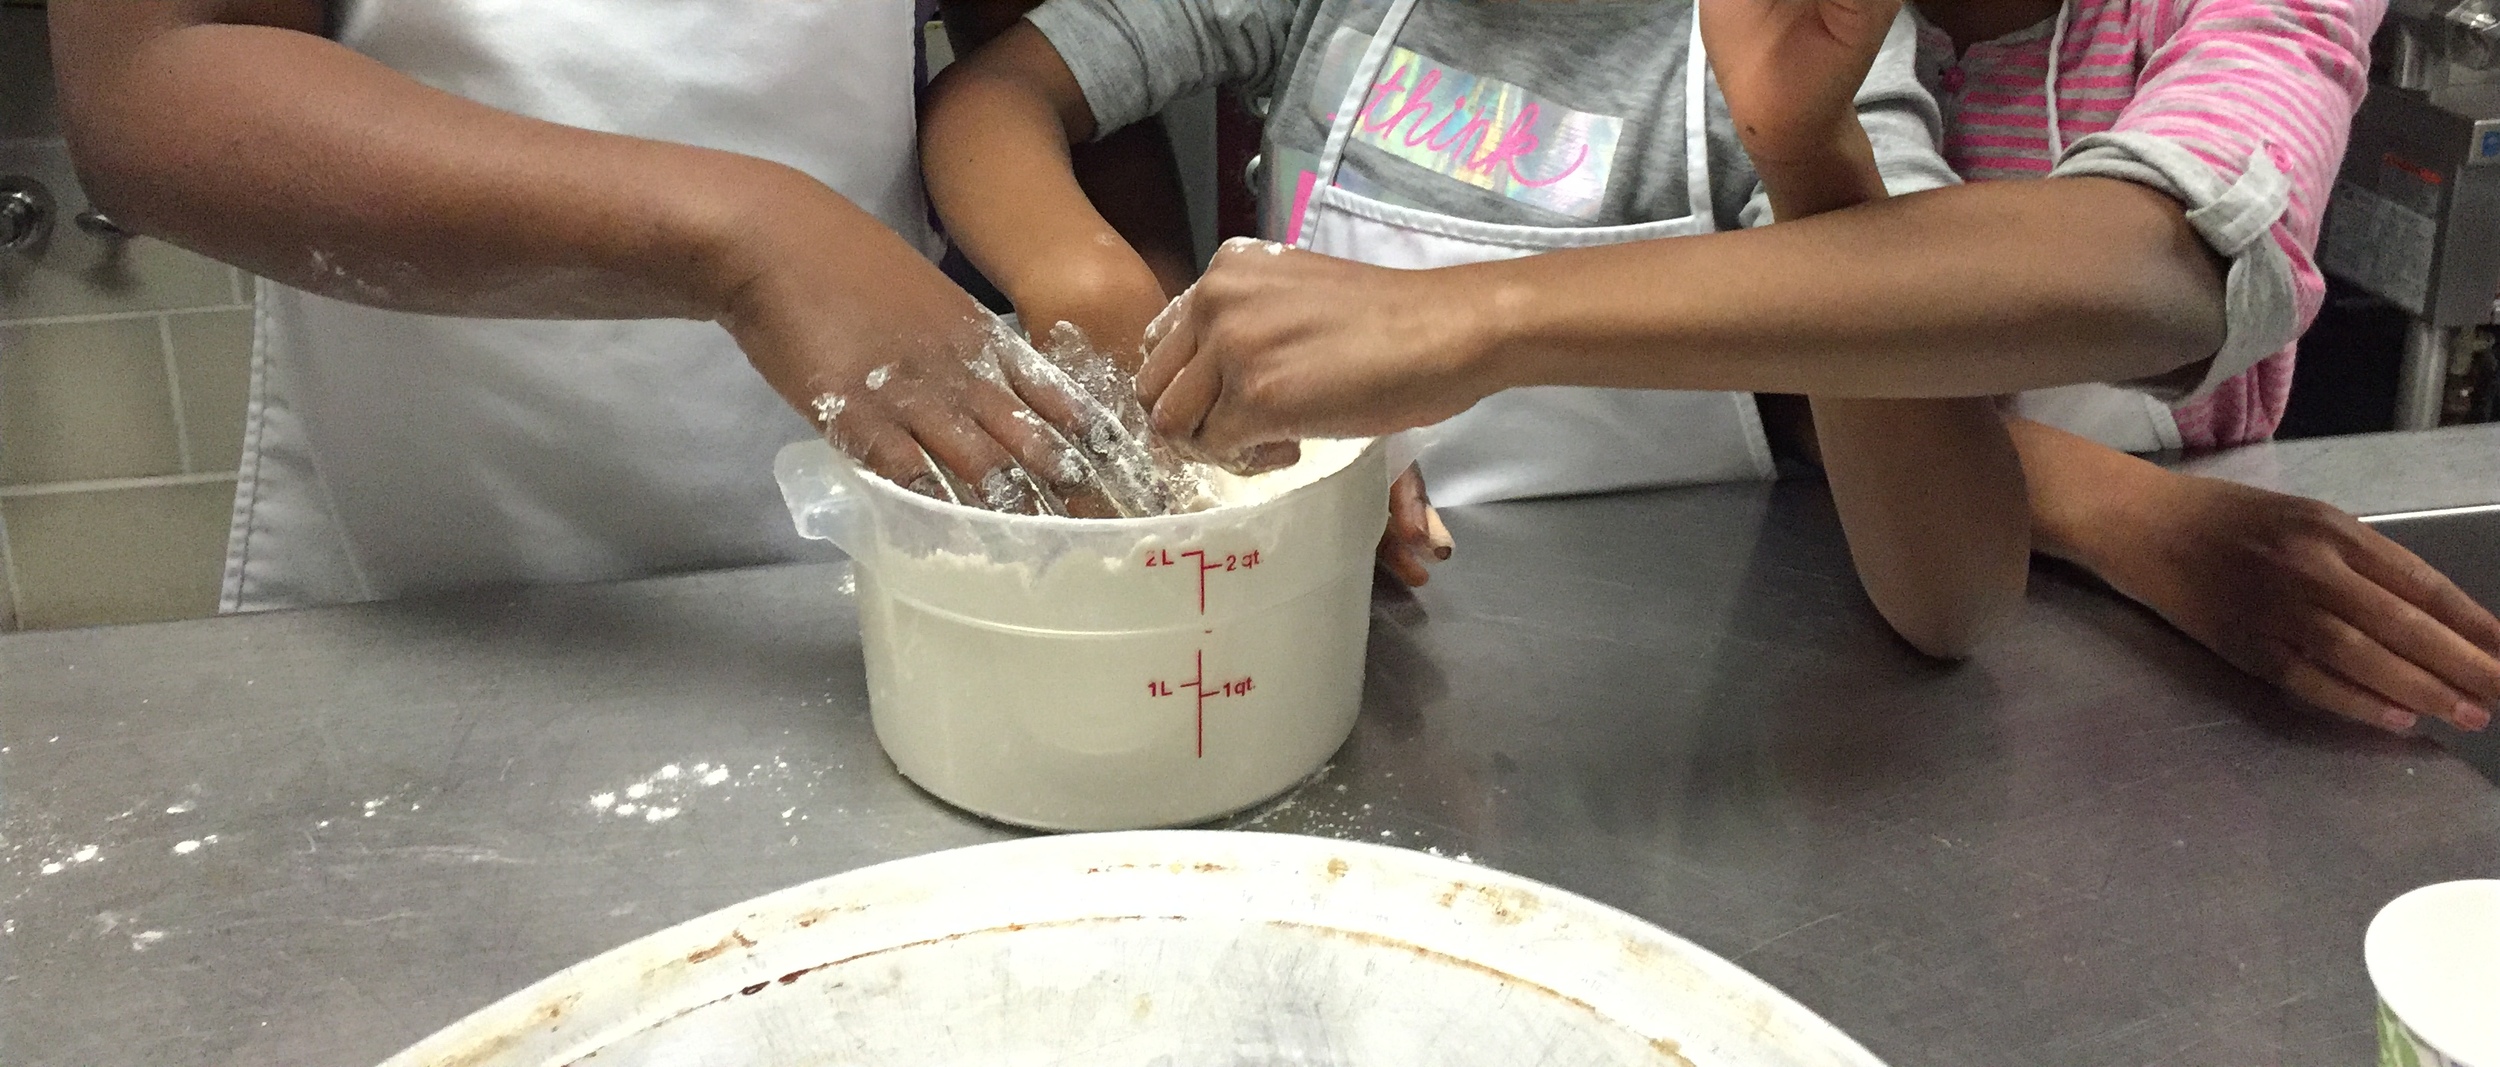 Hands in the Flour